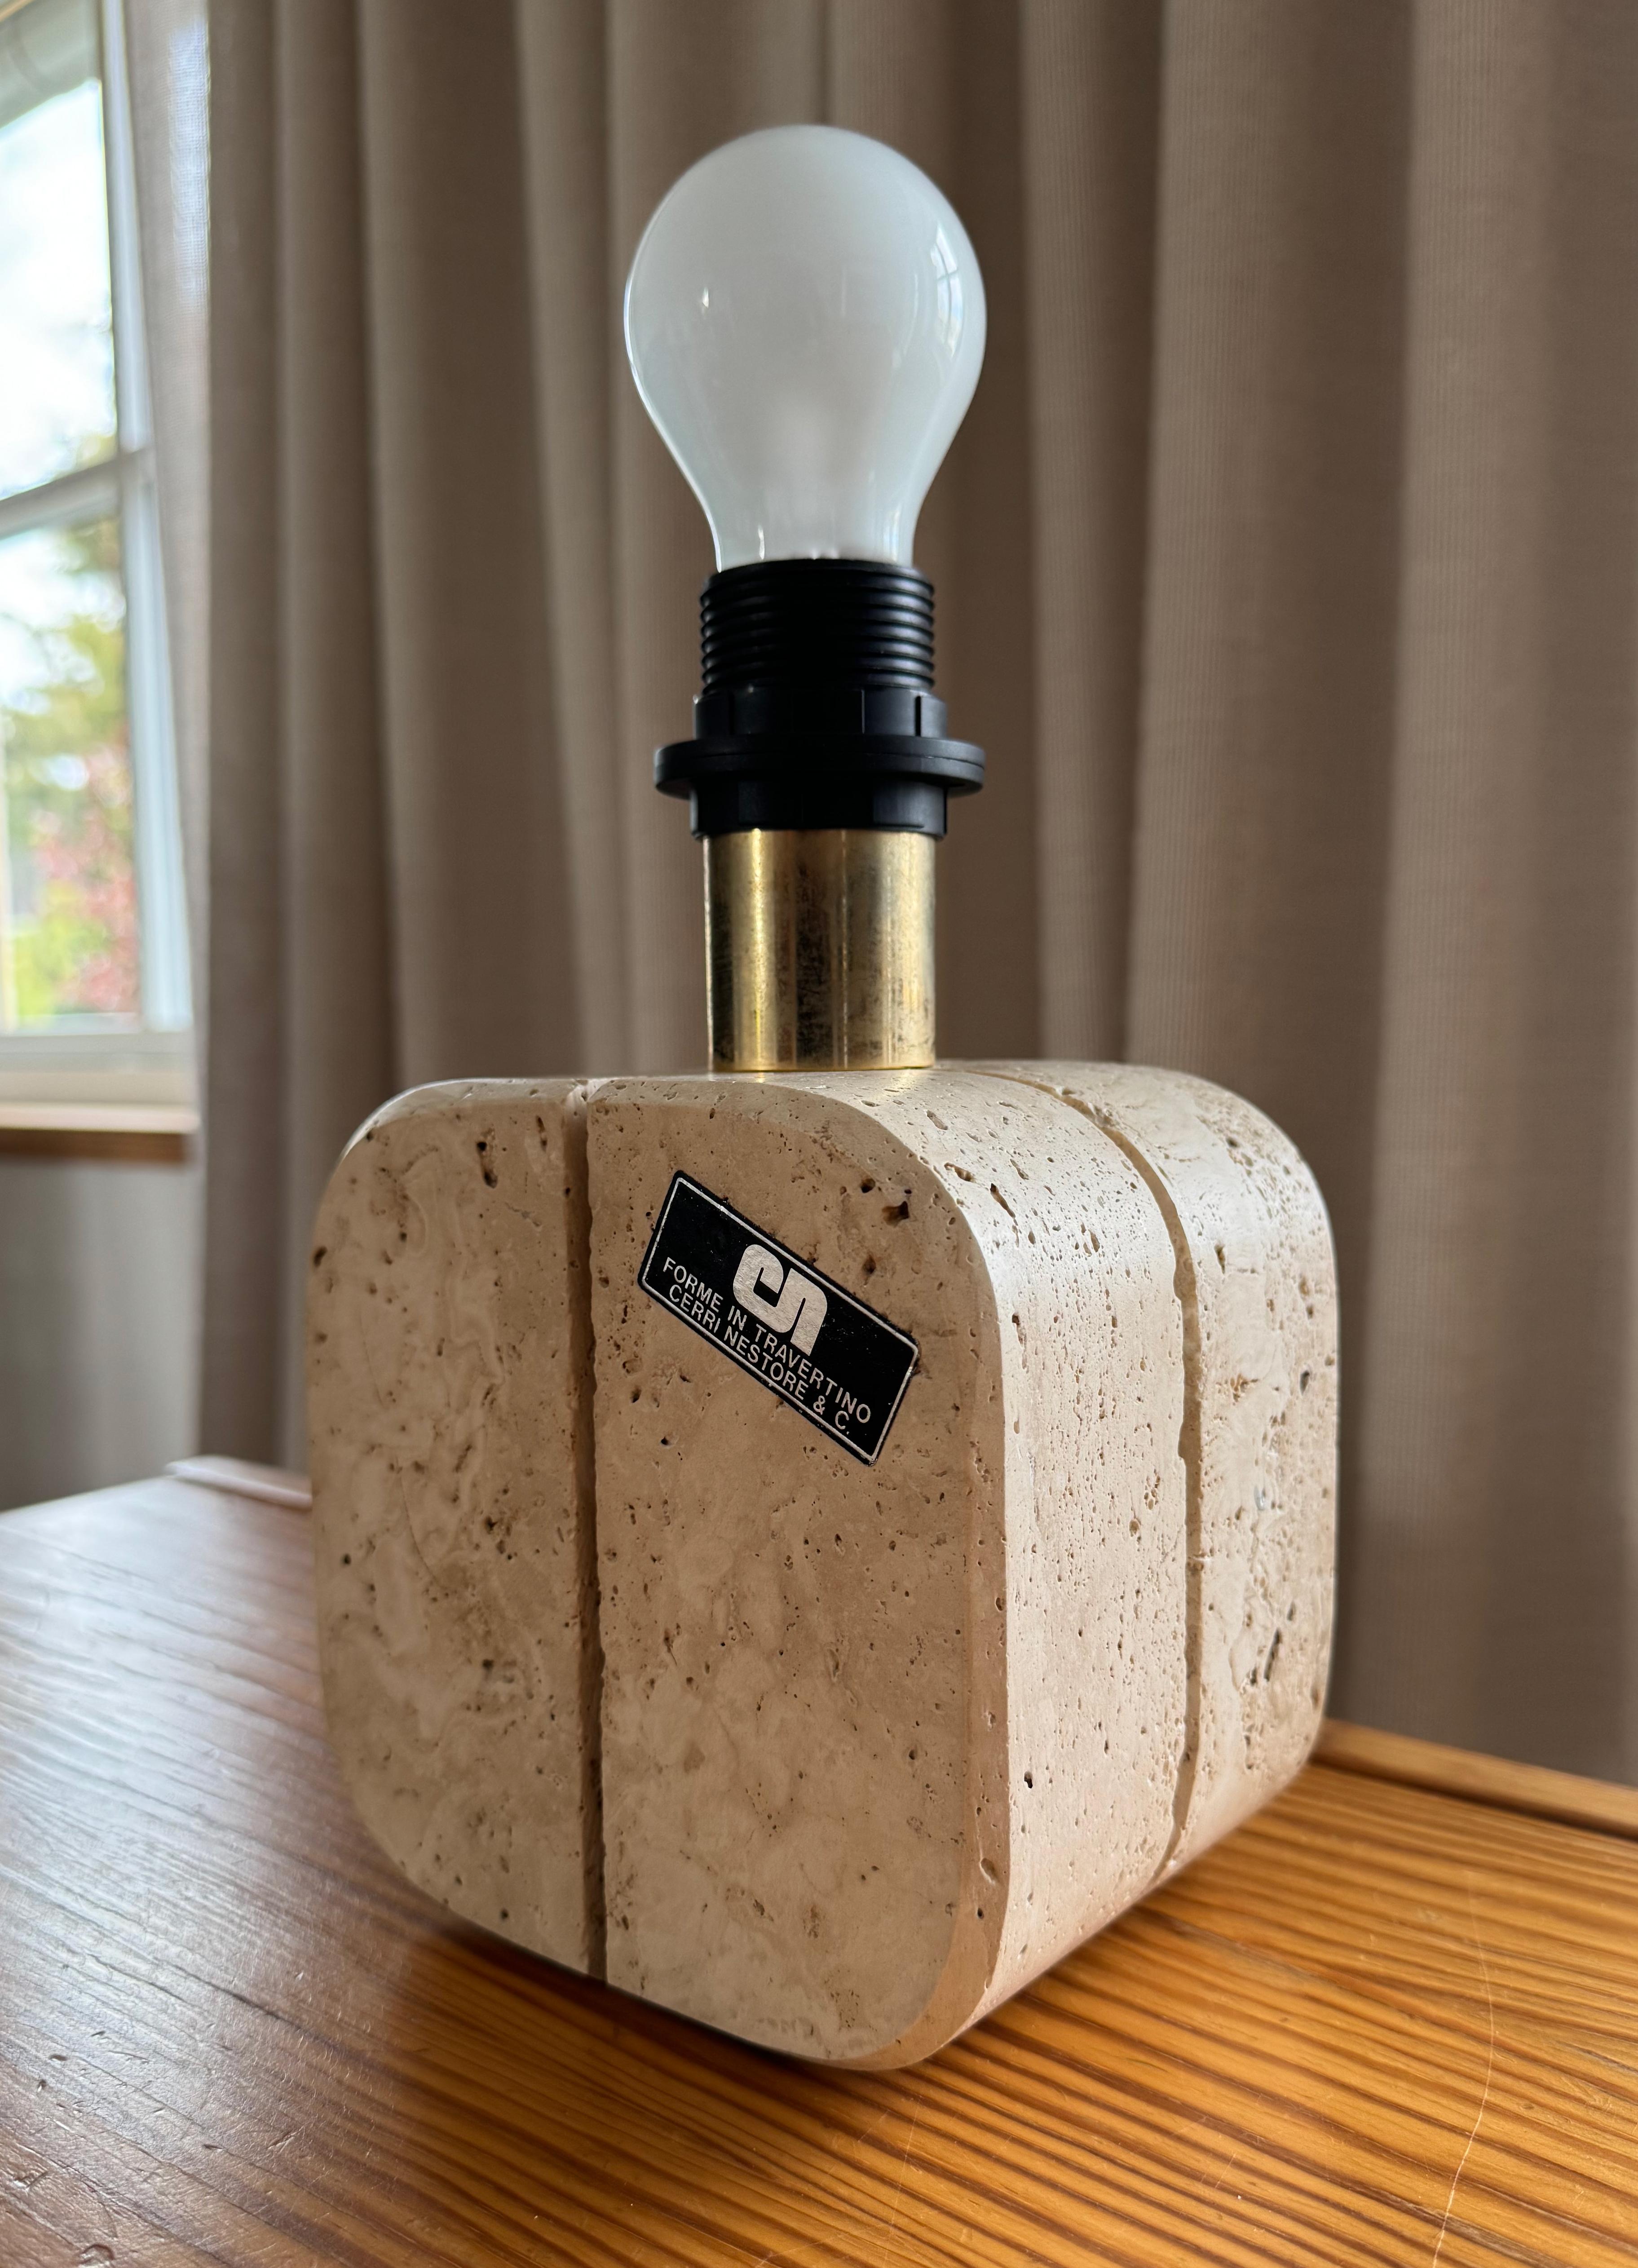 Hand-Crafted Cerri Nestore Table Lamp in Travertine, 1970s. Made in Italy. For Sale